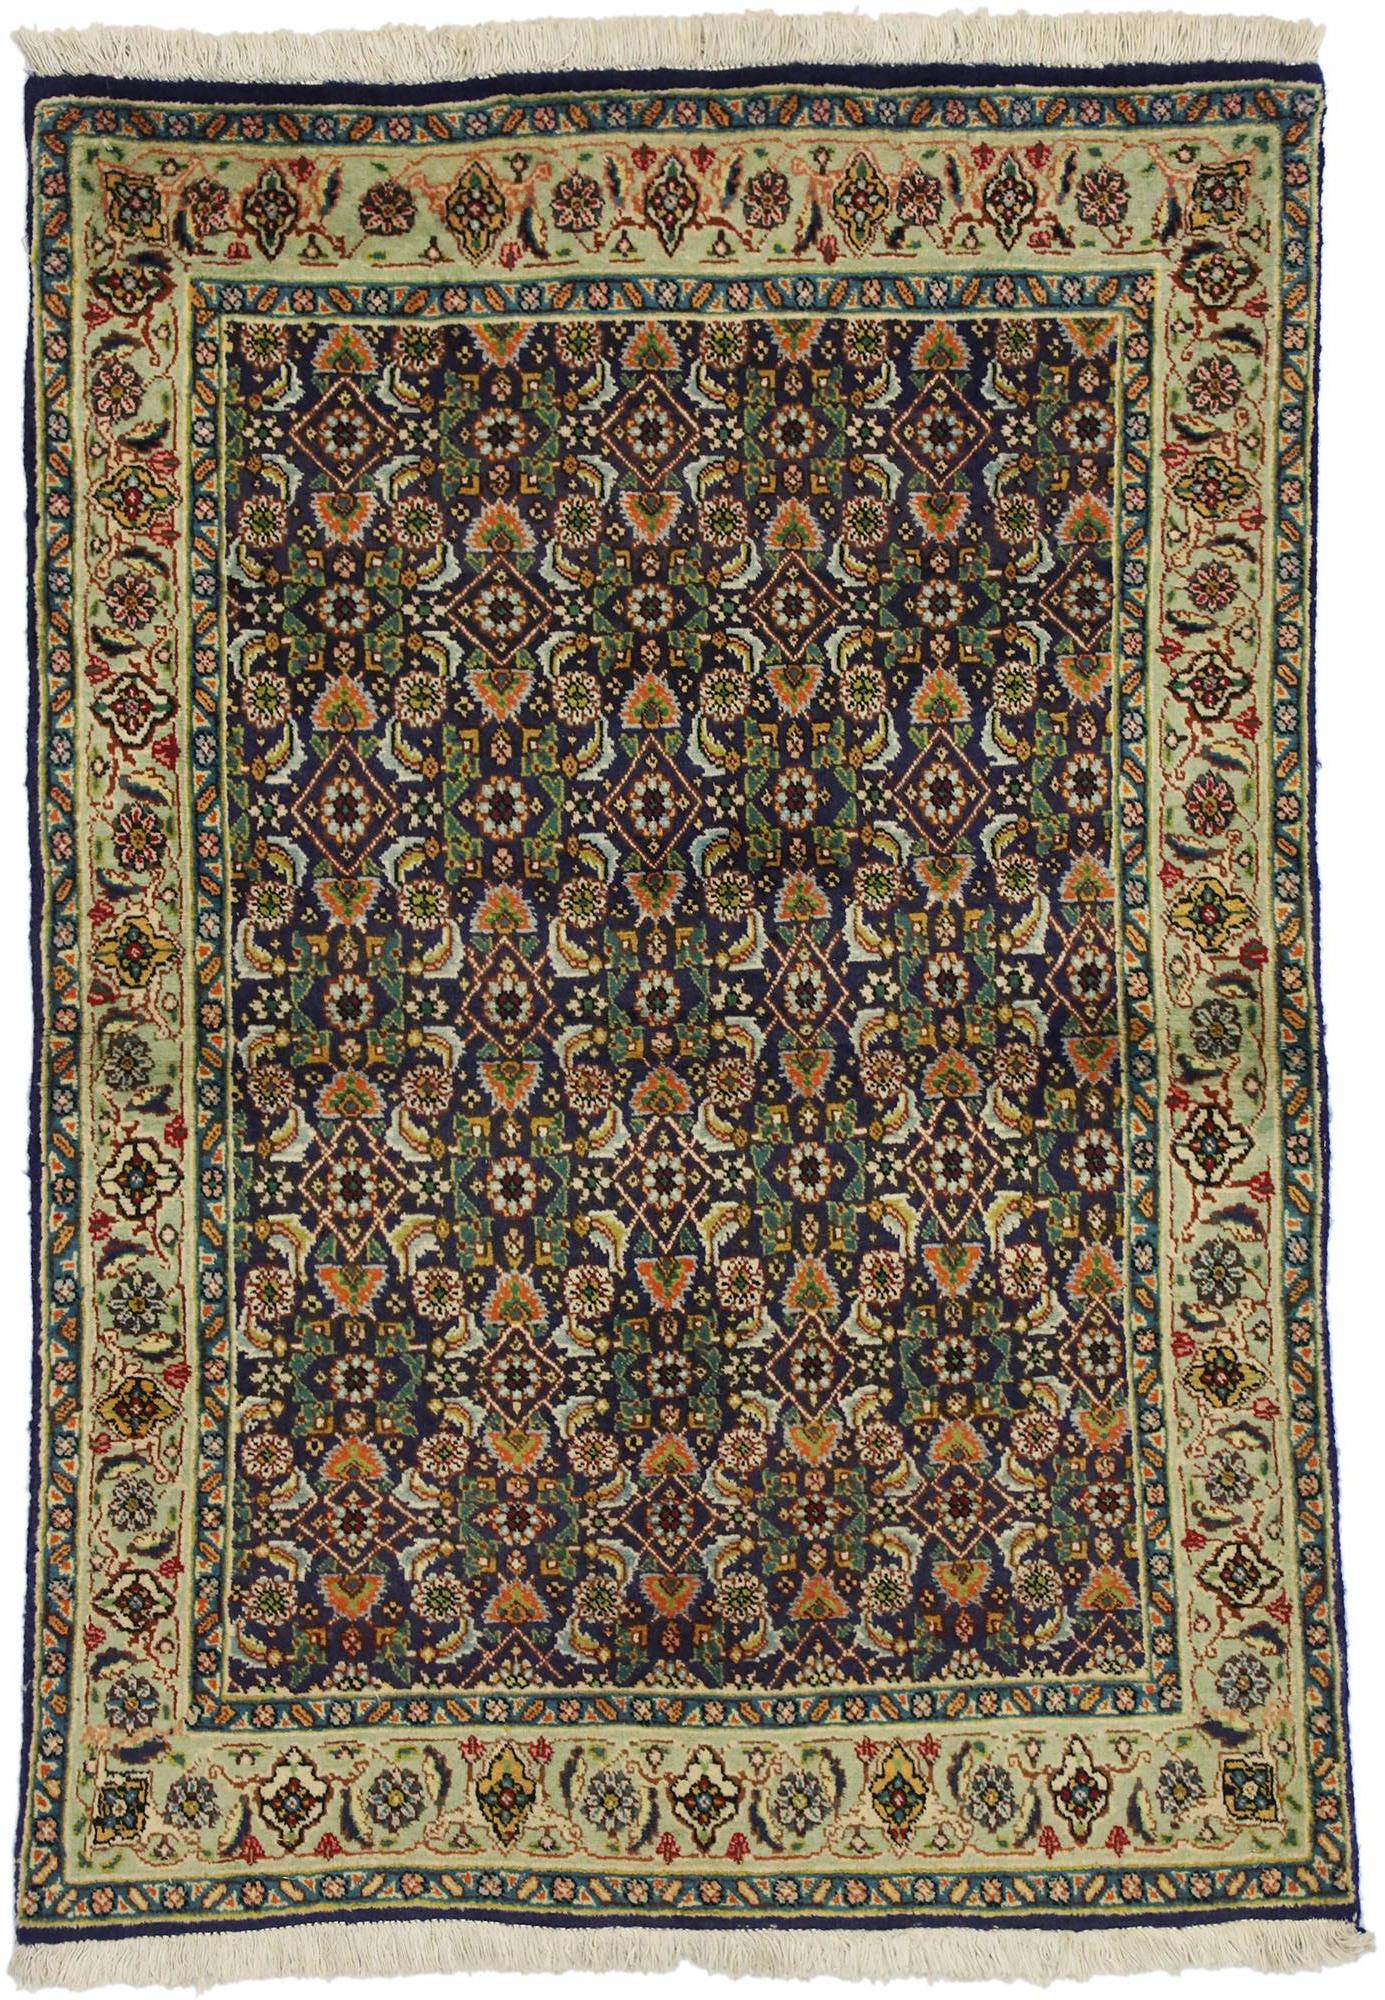 75101 vintage Persian Tabriz rug with traditional style. This hand-knotted wool vintage Persian Tabriz rug features an all-over pattern on a navy blue field surrounded by a classic light green border creating a well-balanced and timeless design.